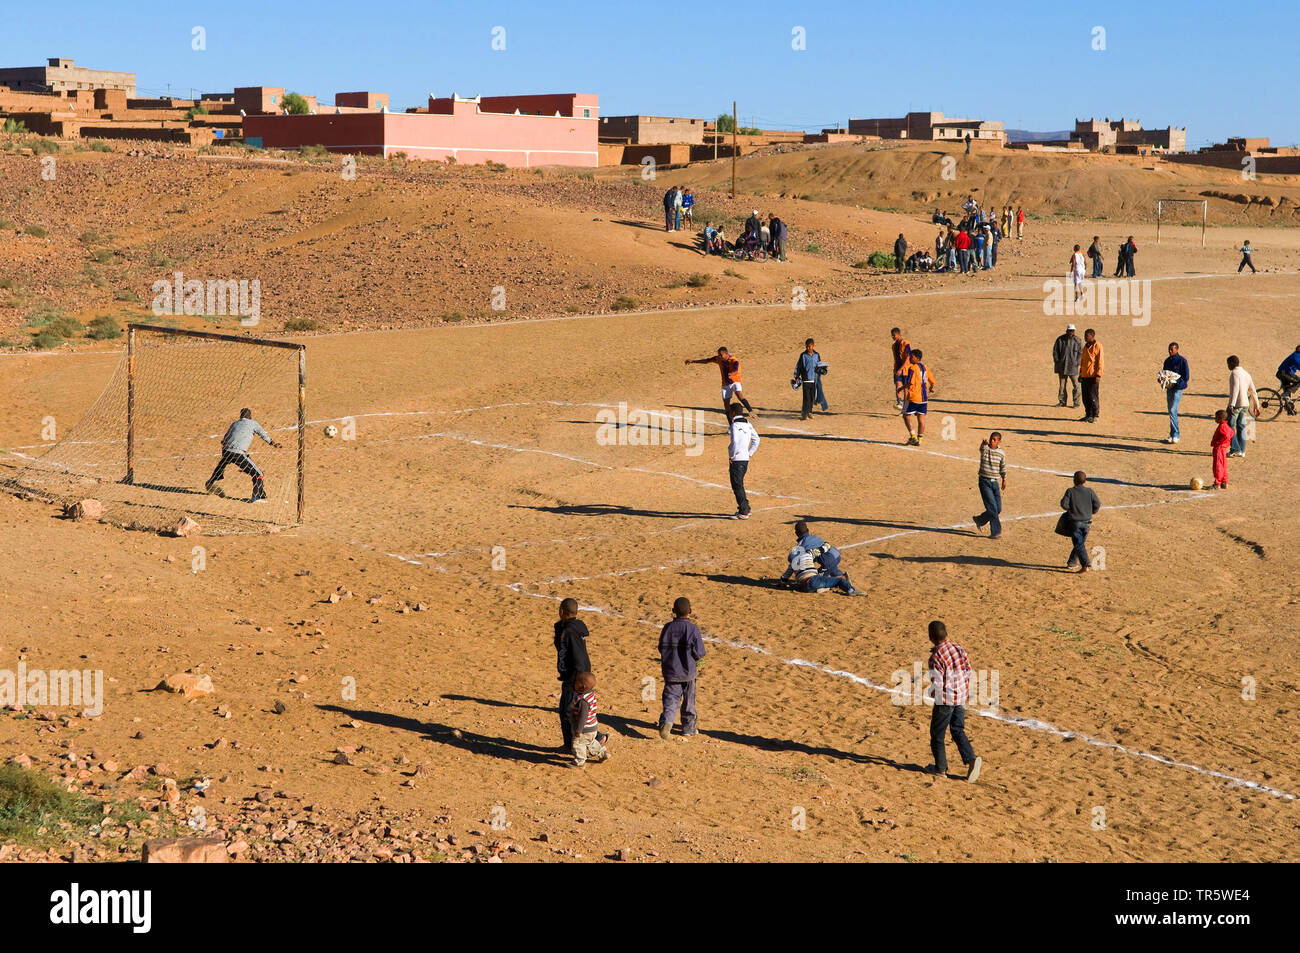 teenies playing soccer in the Berber village Taourirt, Morocco, Agdz, Taourirt Stock Photo